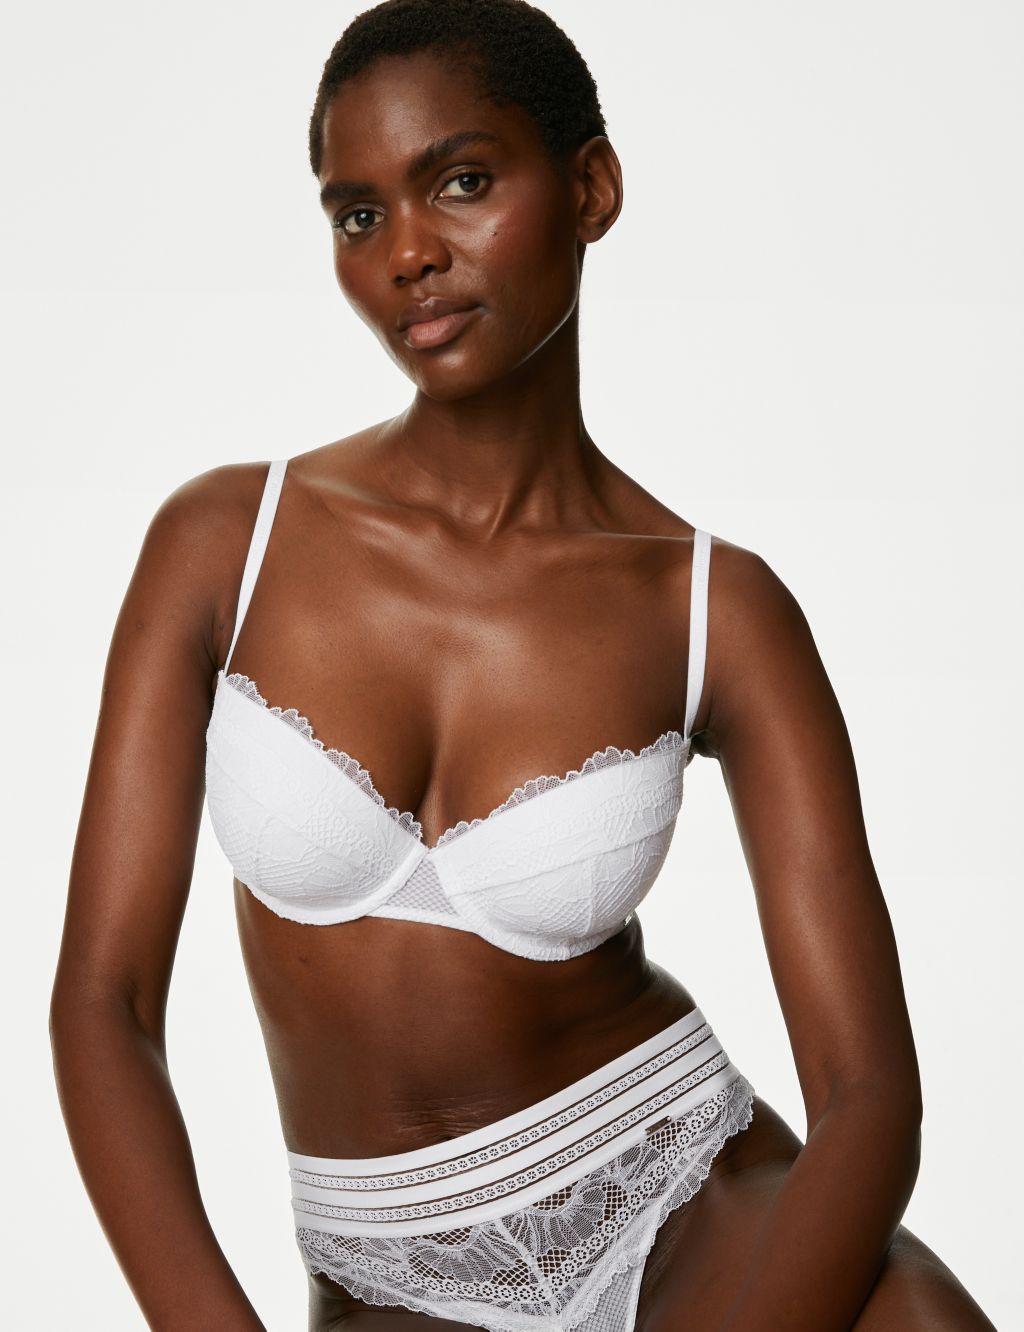 BNWH M&S Autograph Swiss embroidery white non padded balcony bras 34G 38A